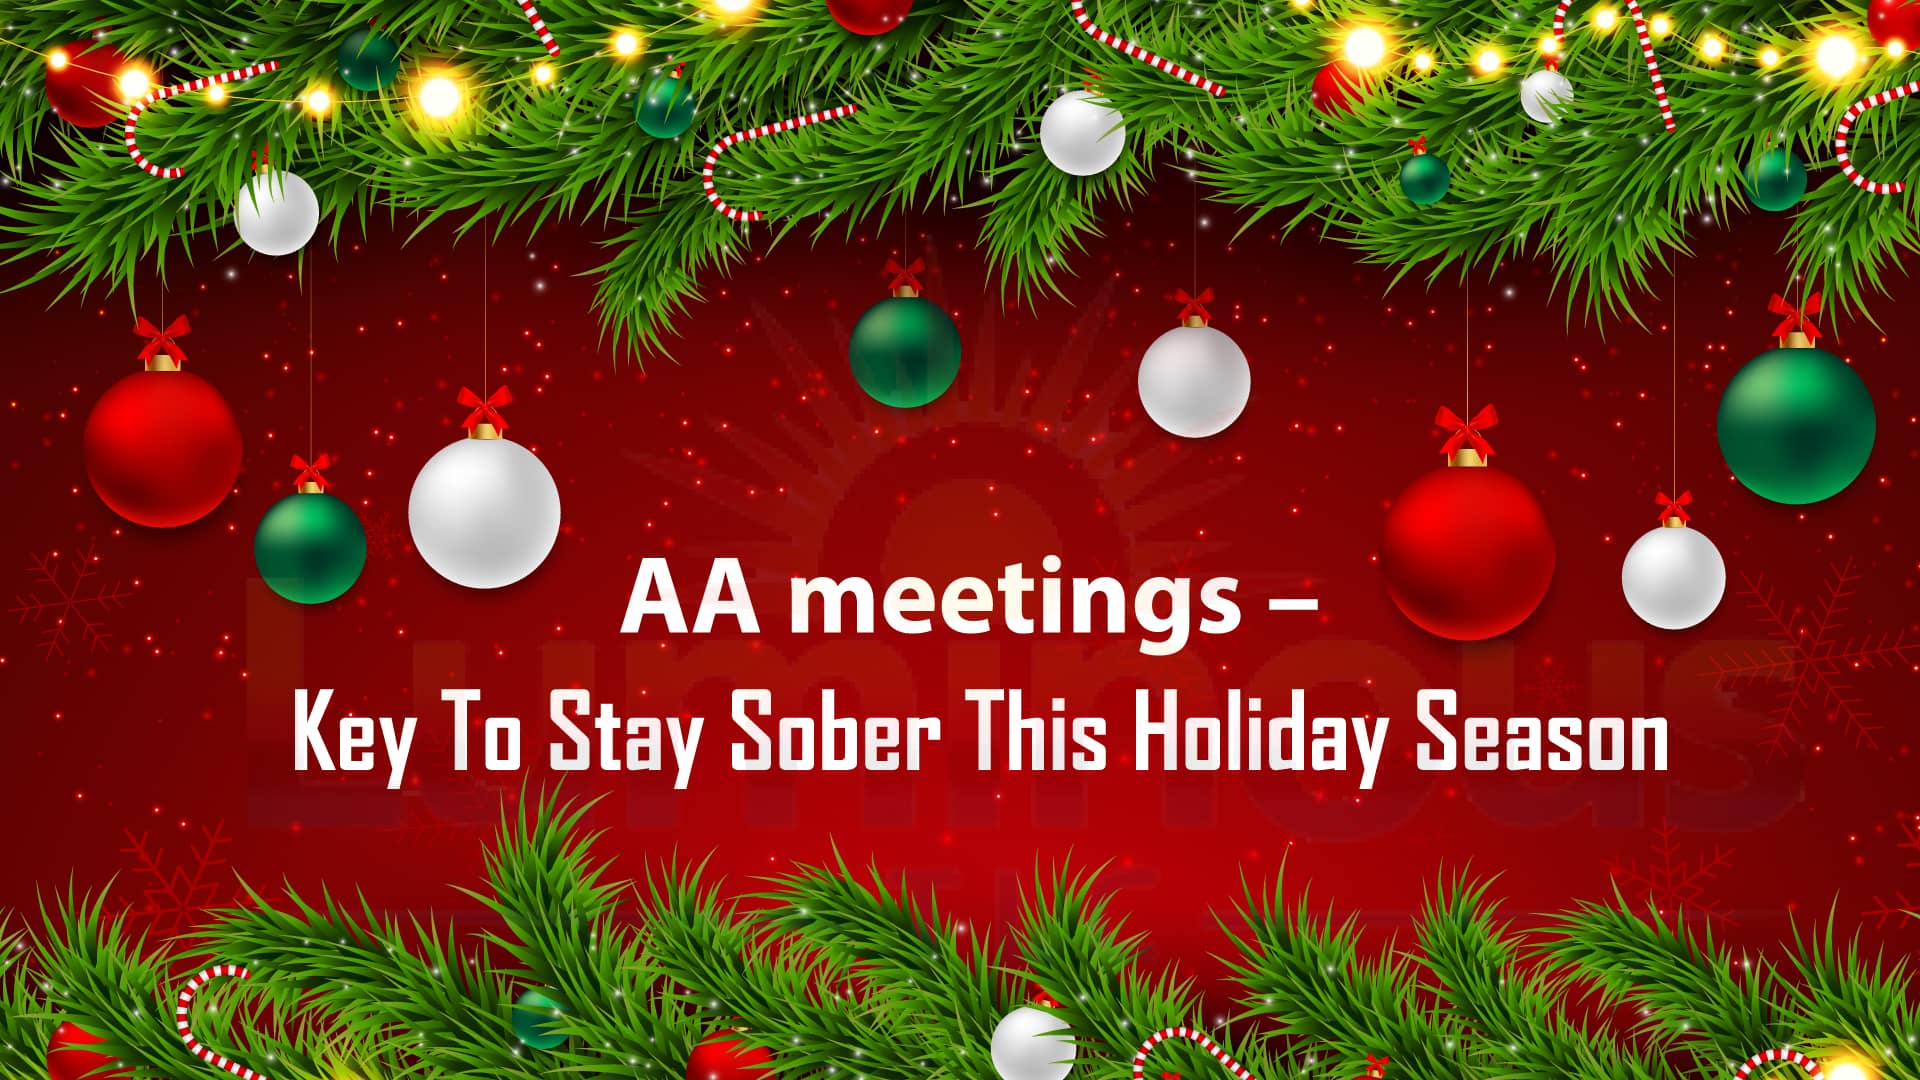 AA meetings - Key To Stay Sober This Holiday Season